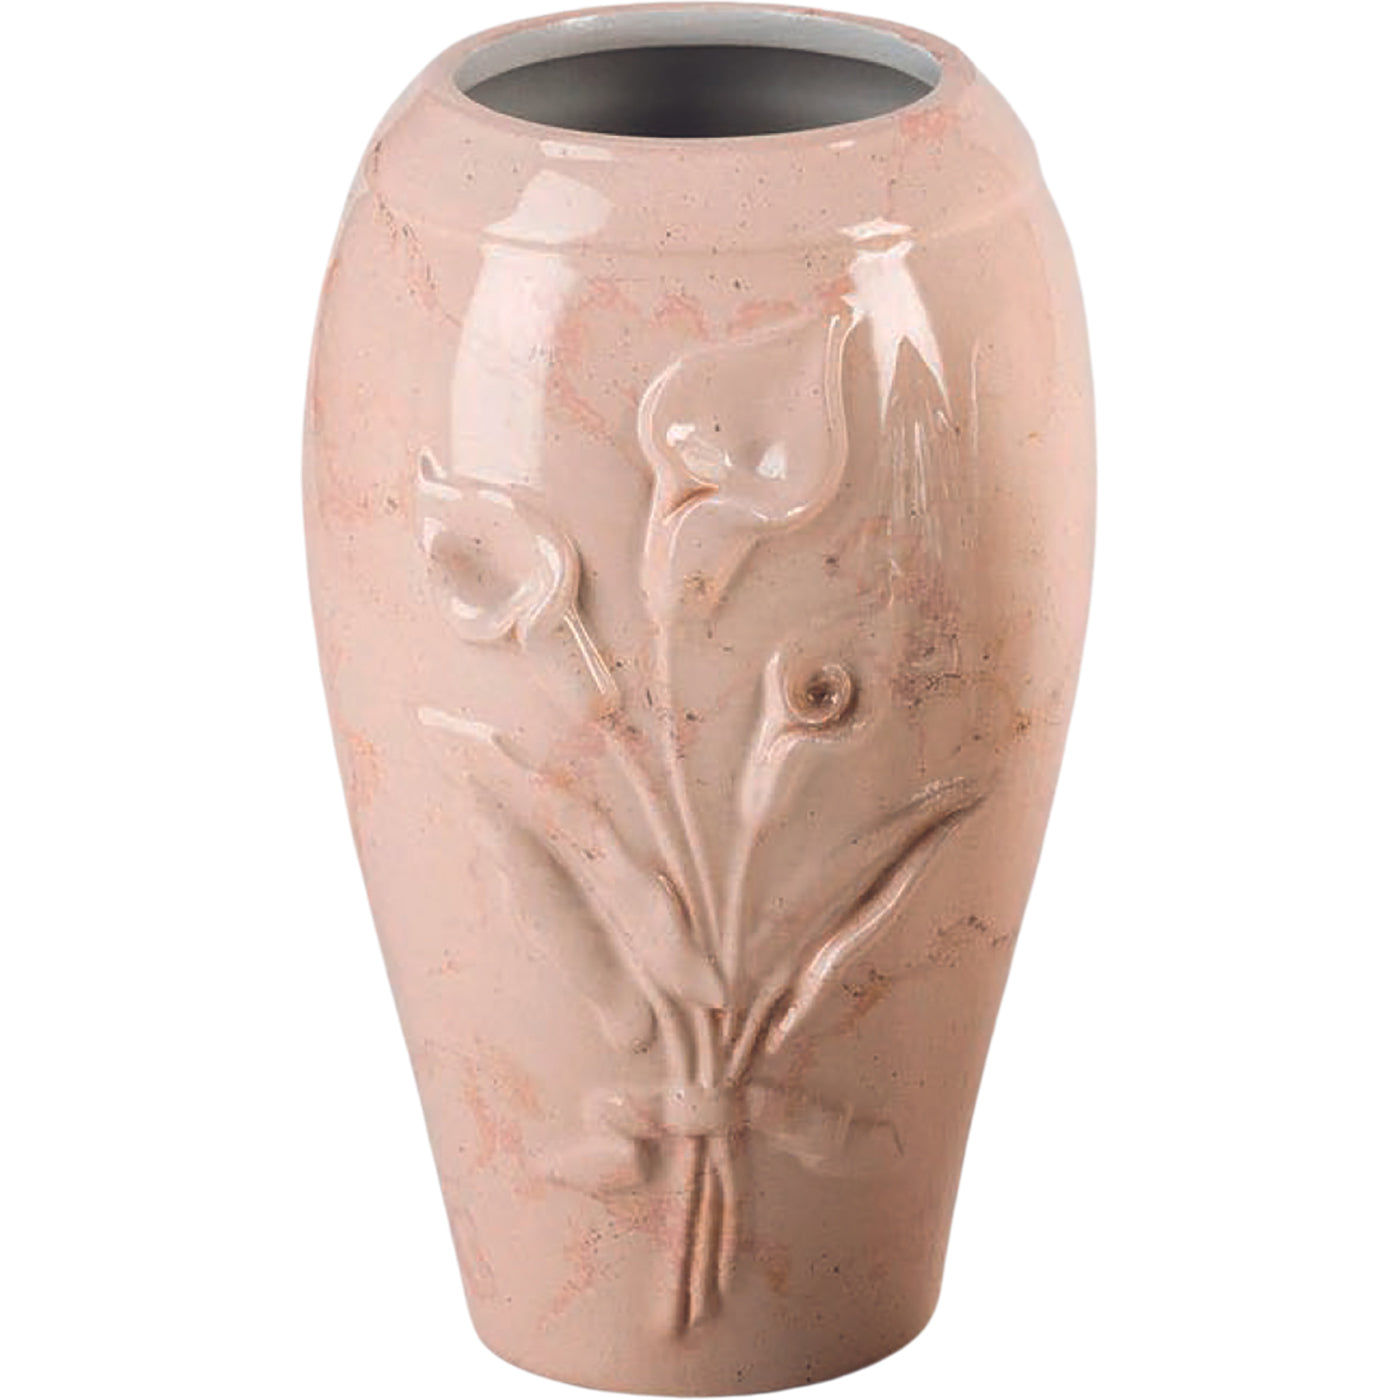 Grave vases Calla botticino 21x13cm - 8.3x5.1in In white porcelain with botticino decoration, ground attached CAL162T/BOTT